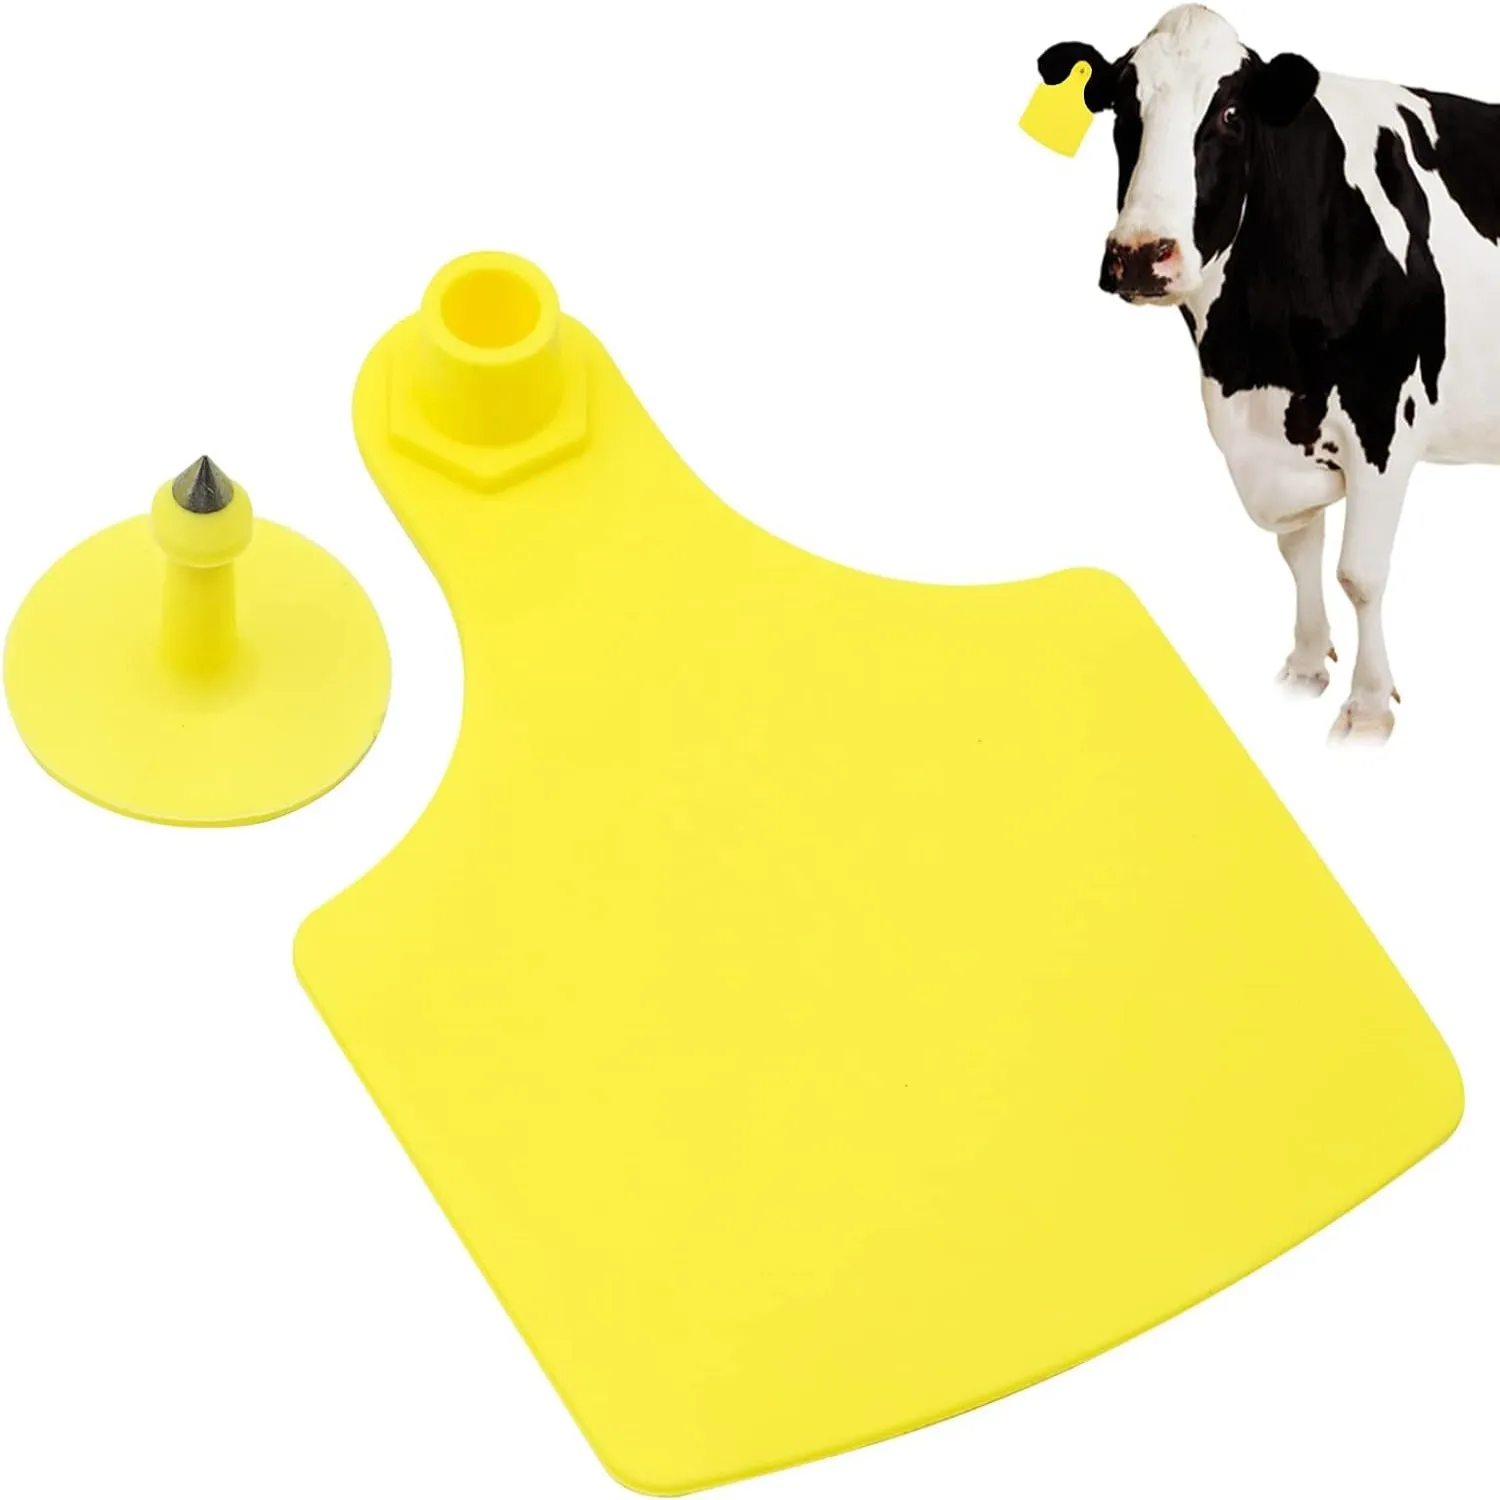 Livestock Ear Tags Big Blank 100PCS Identification Precision Tags for Cattle Cows Pigs Hog Goats Sheep Pig Calf Animal